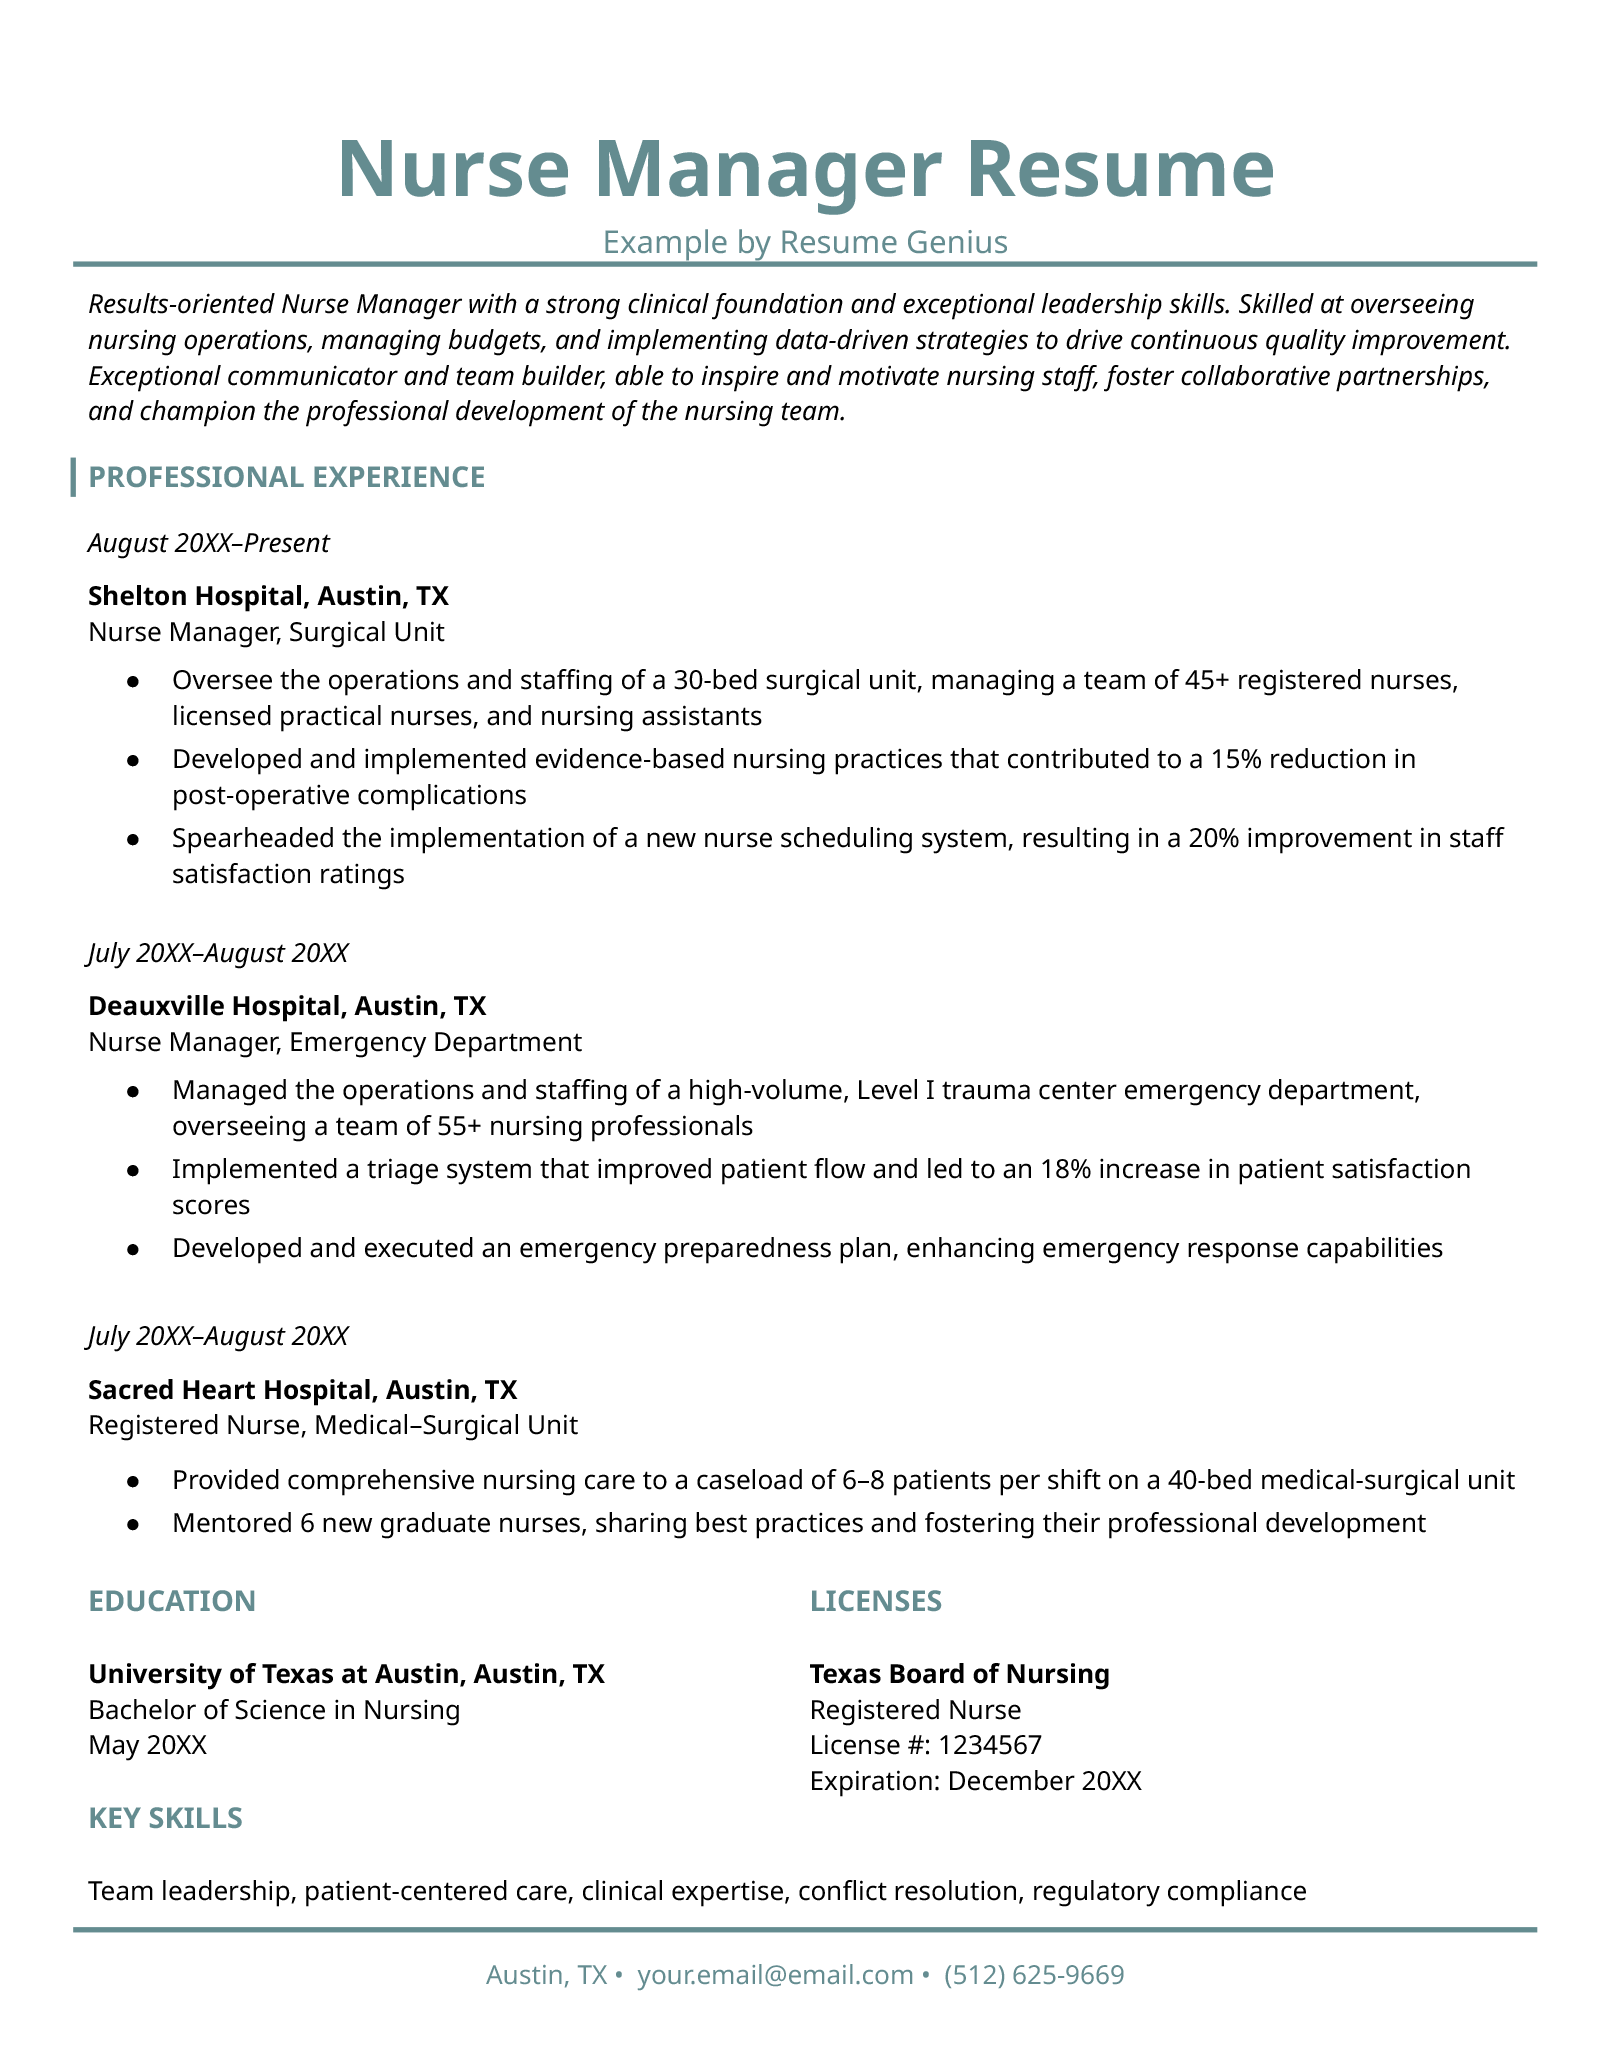 An example resume for a nurse manager.